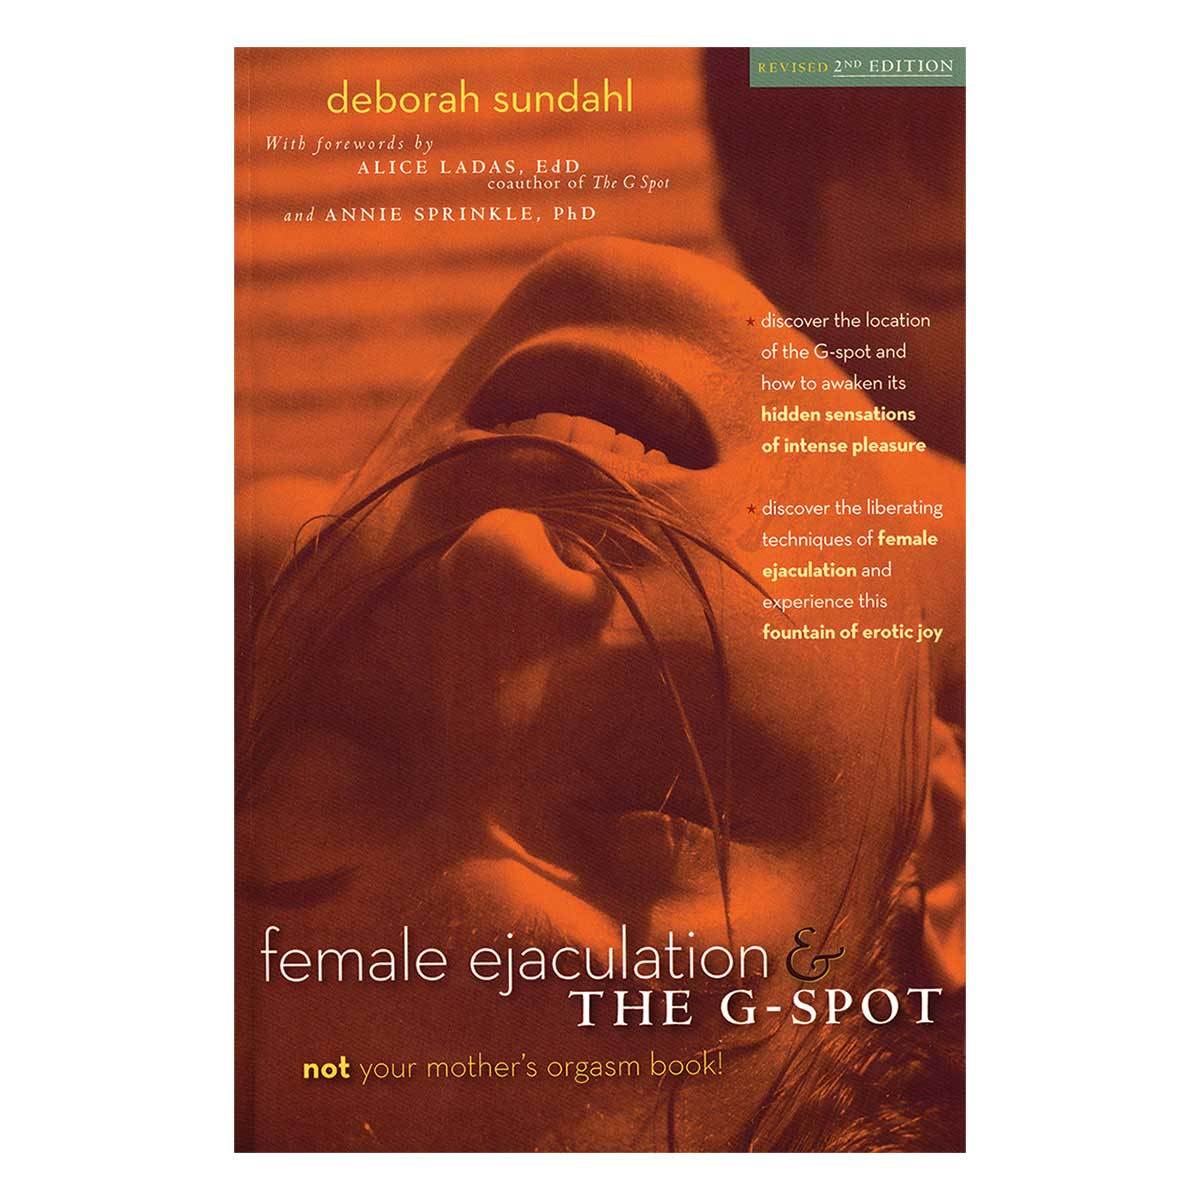 Female Ejaculation & the G-Spot - Revised 2nd Edition - Hunter House